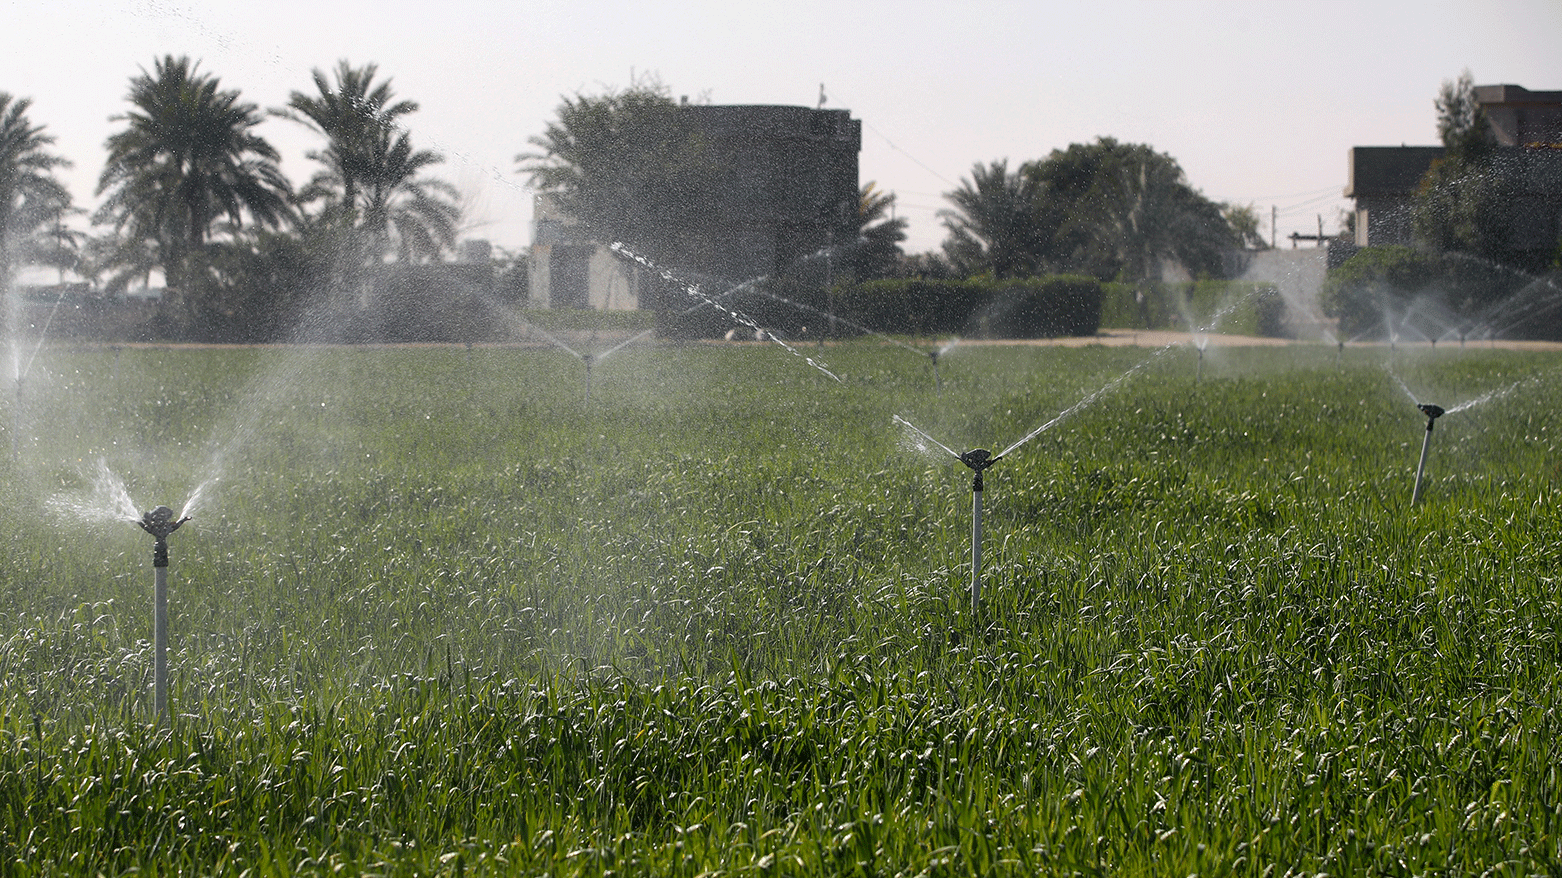 Sprinklers spray a field, part of a new water management systems brought by the UN World Food Programme, on a farm in the village of al-Azrakiya. (Photo: AFP)